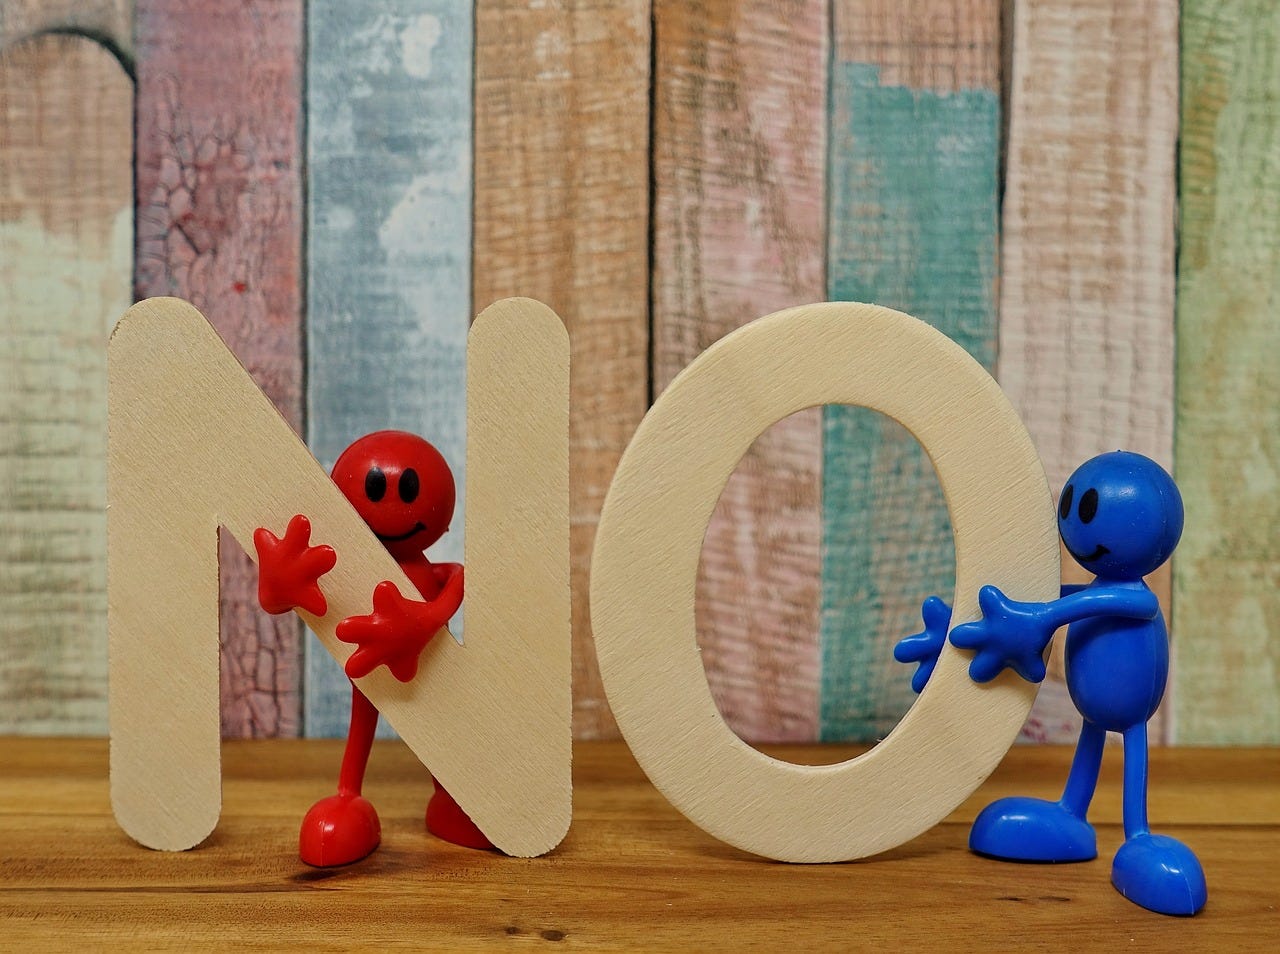 Against the background of a fence panel, two figurines (one blue, one red) hold up the letters "N" and "O"